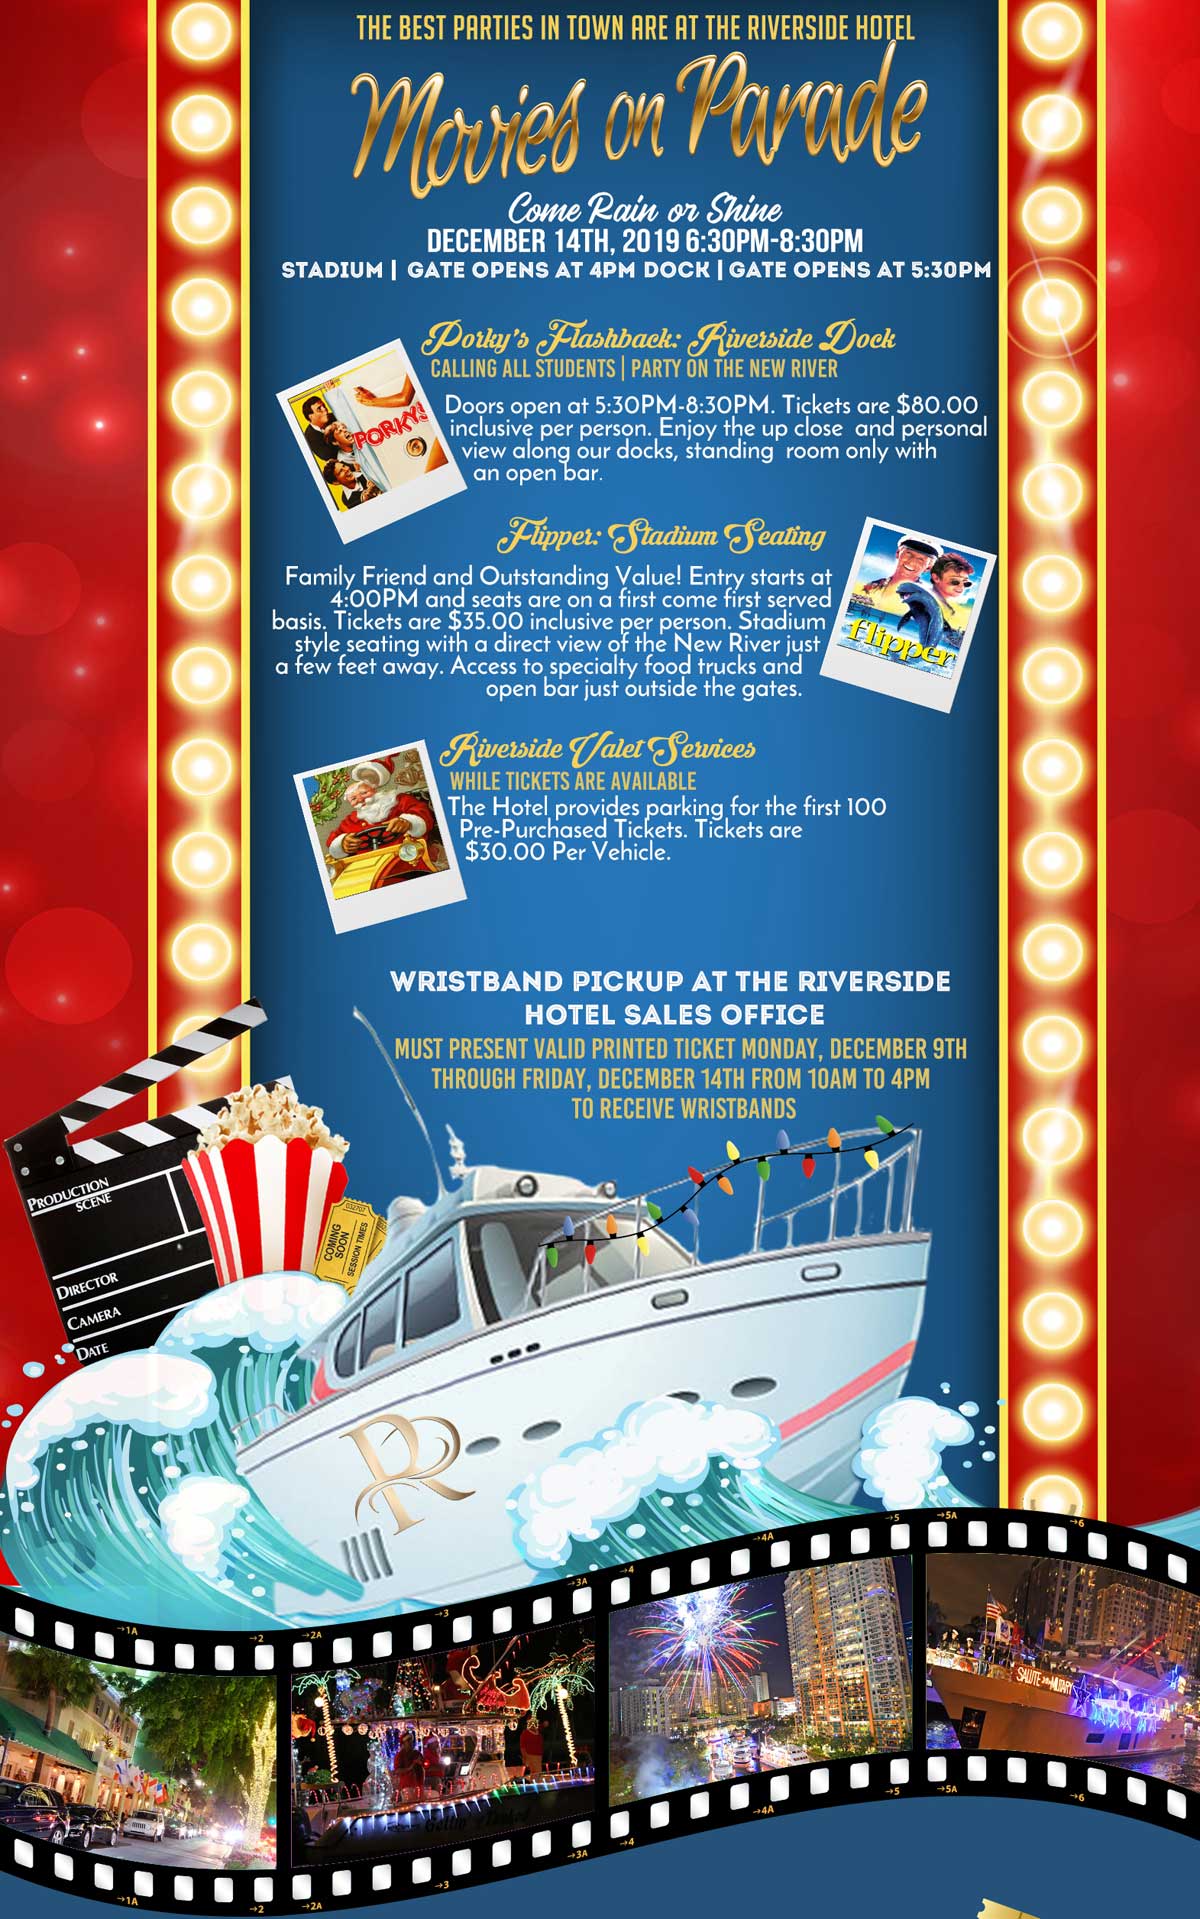 Winterfest Boat Parade at The Riverside Hotel | Saturday, December 14th